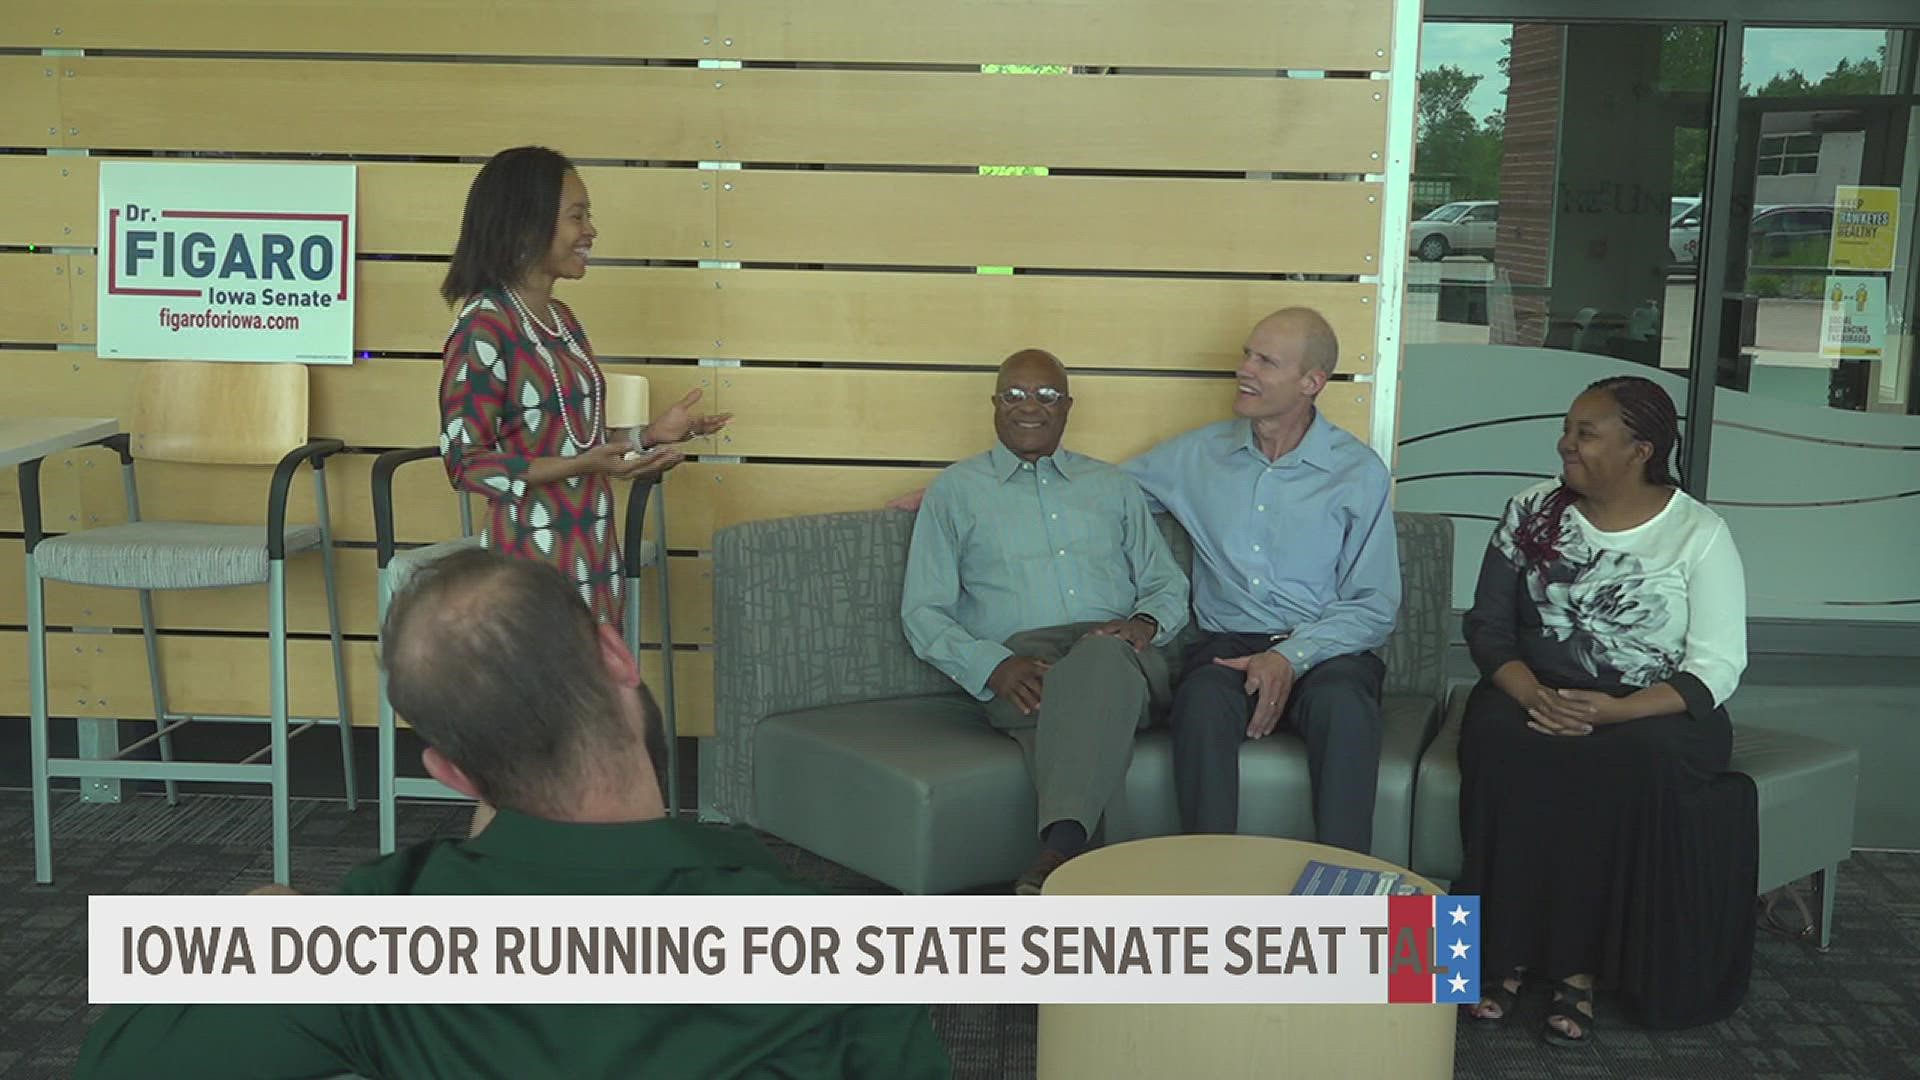 At a mental health discussion, Iowa State Senate candidate Dr. Mary Kathleen Figaro shared her thoughts on and plans for combating worsening mental health.